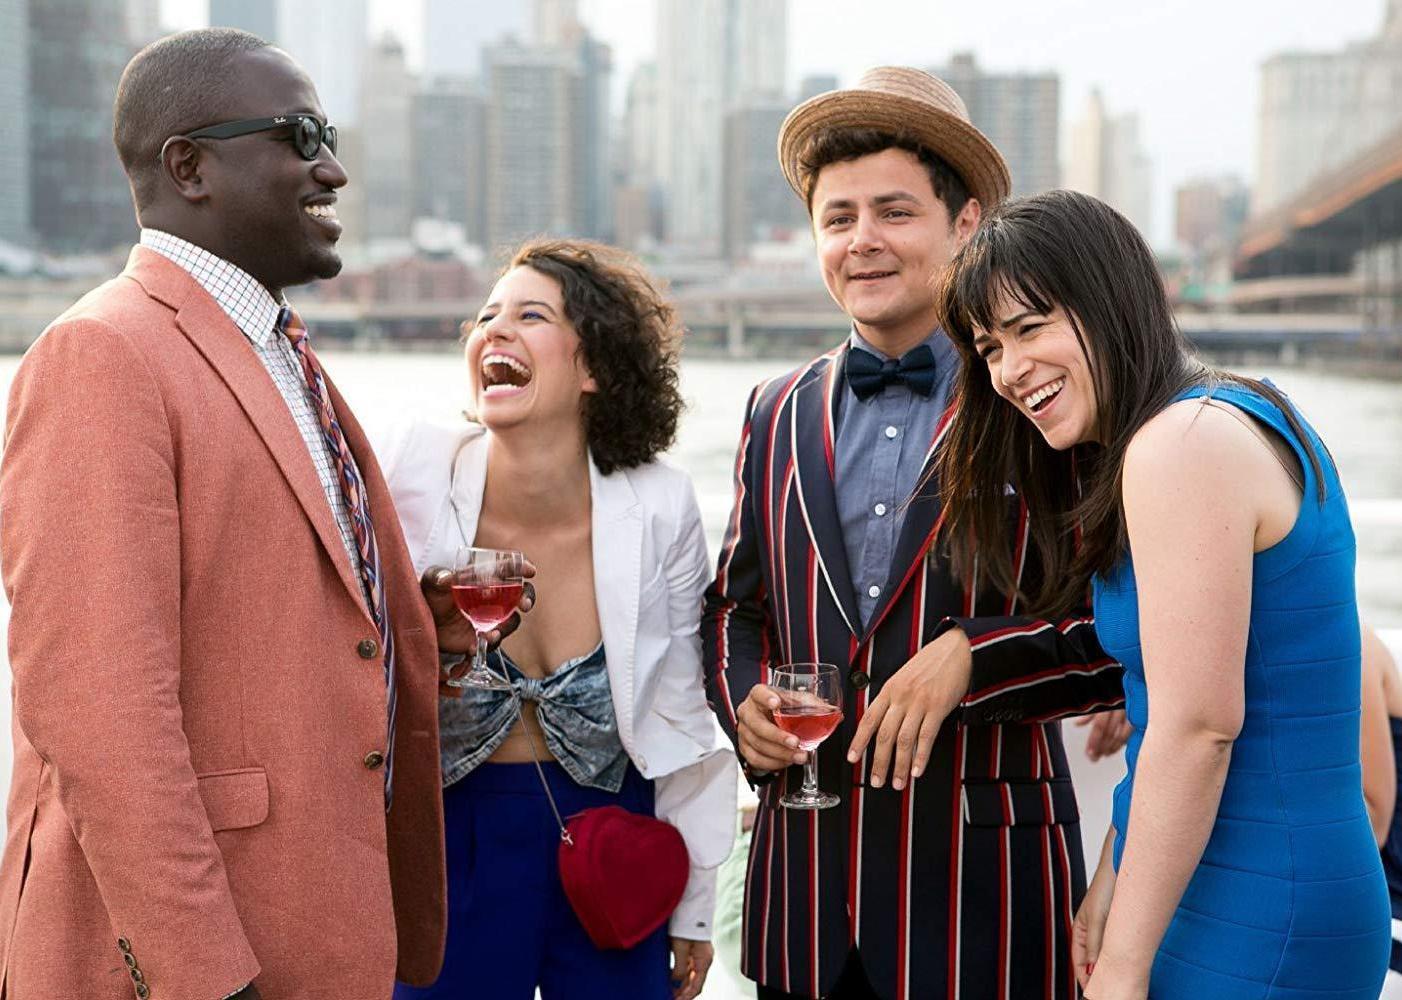 Actors in a scene from ‘Broad City’.